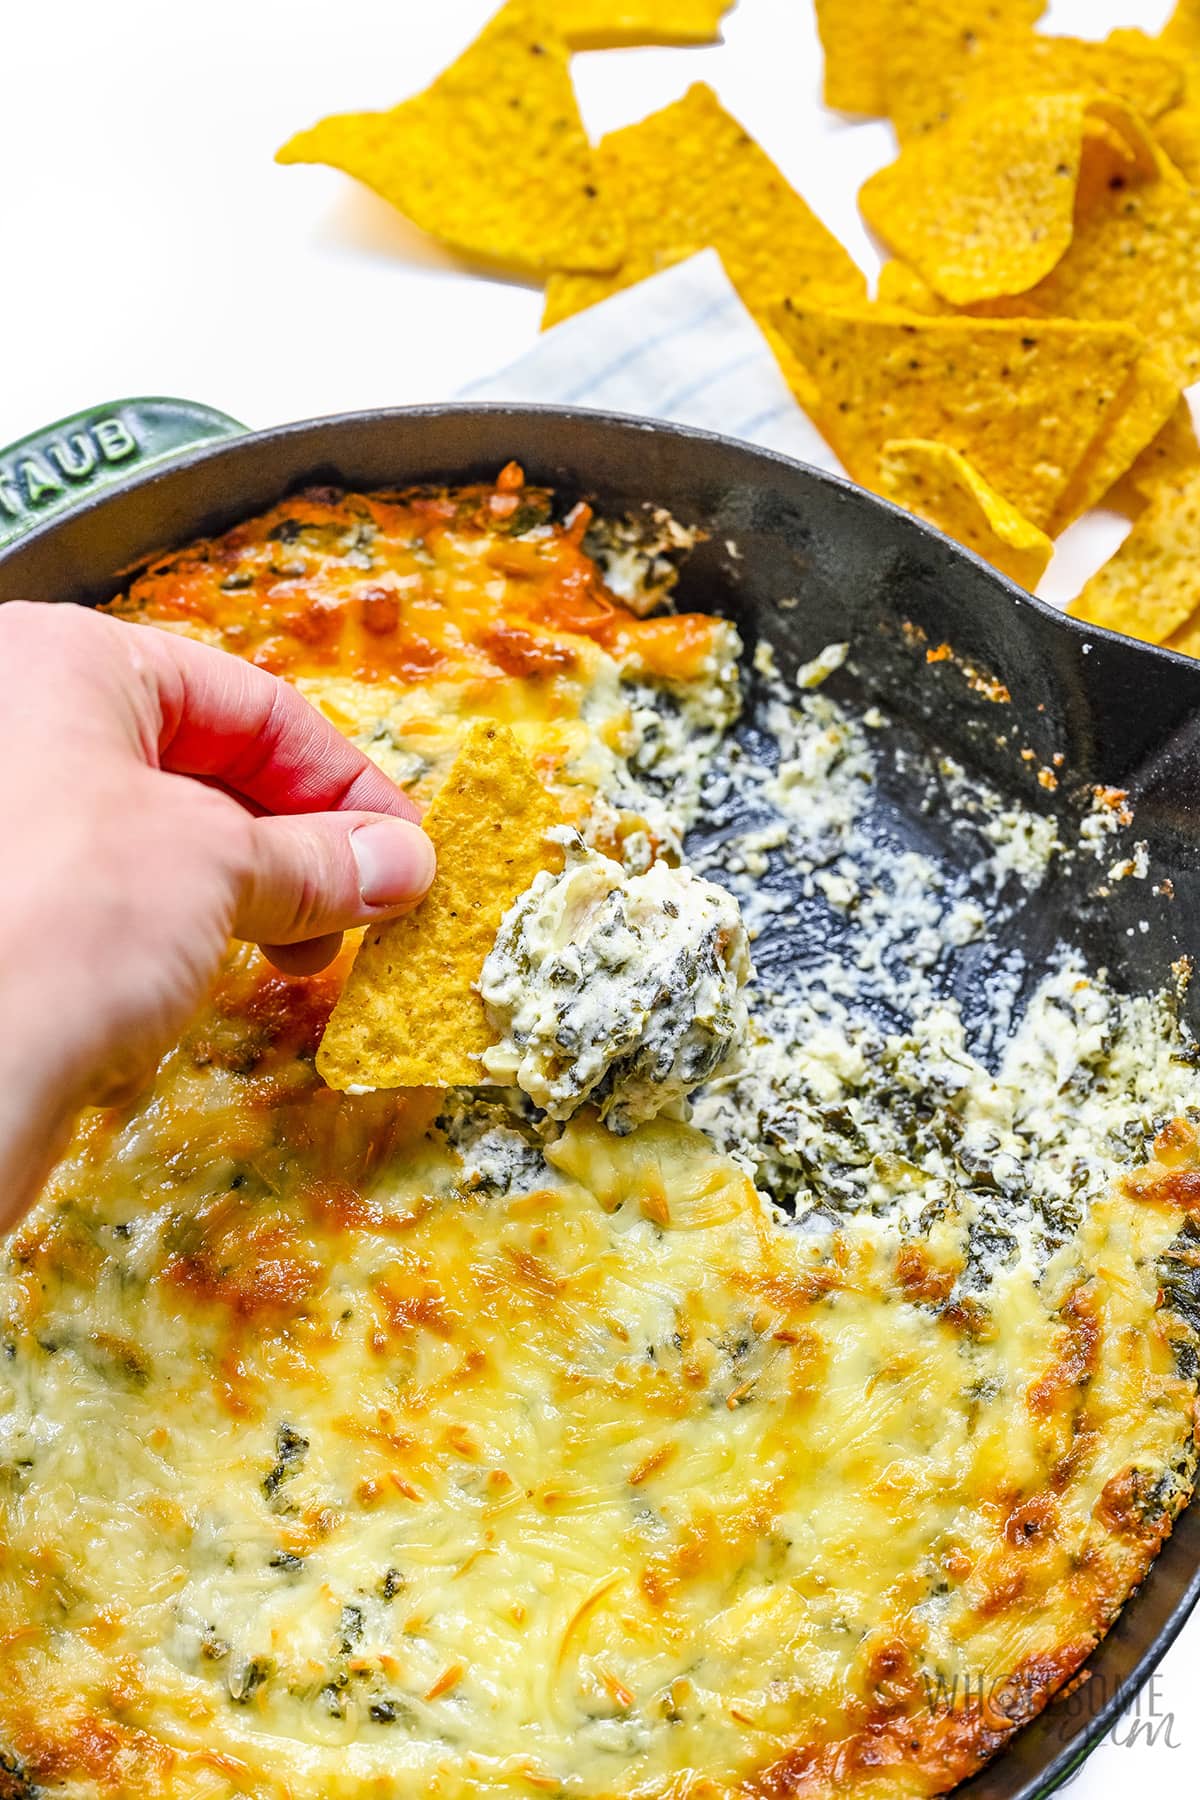 Scooping spinach dip with tortilla chips.